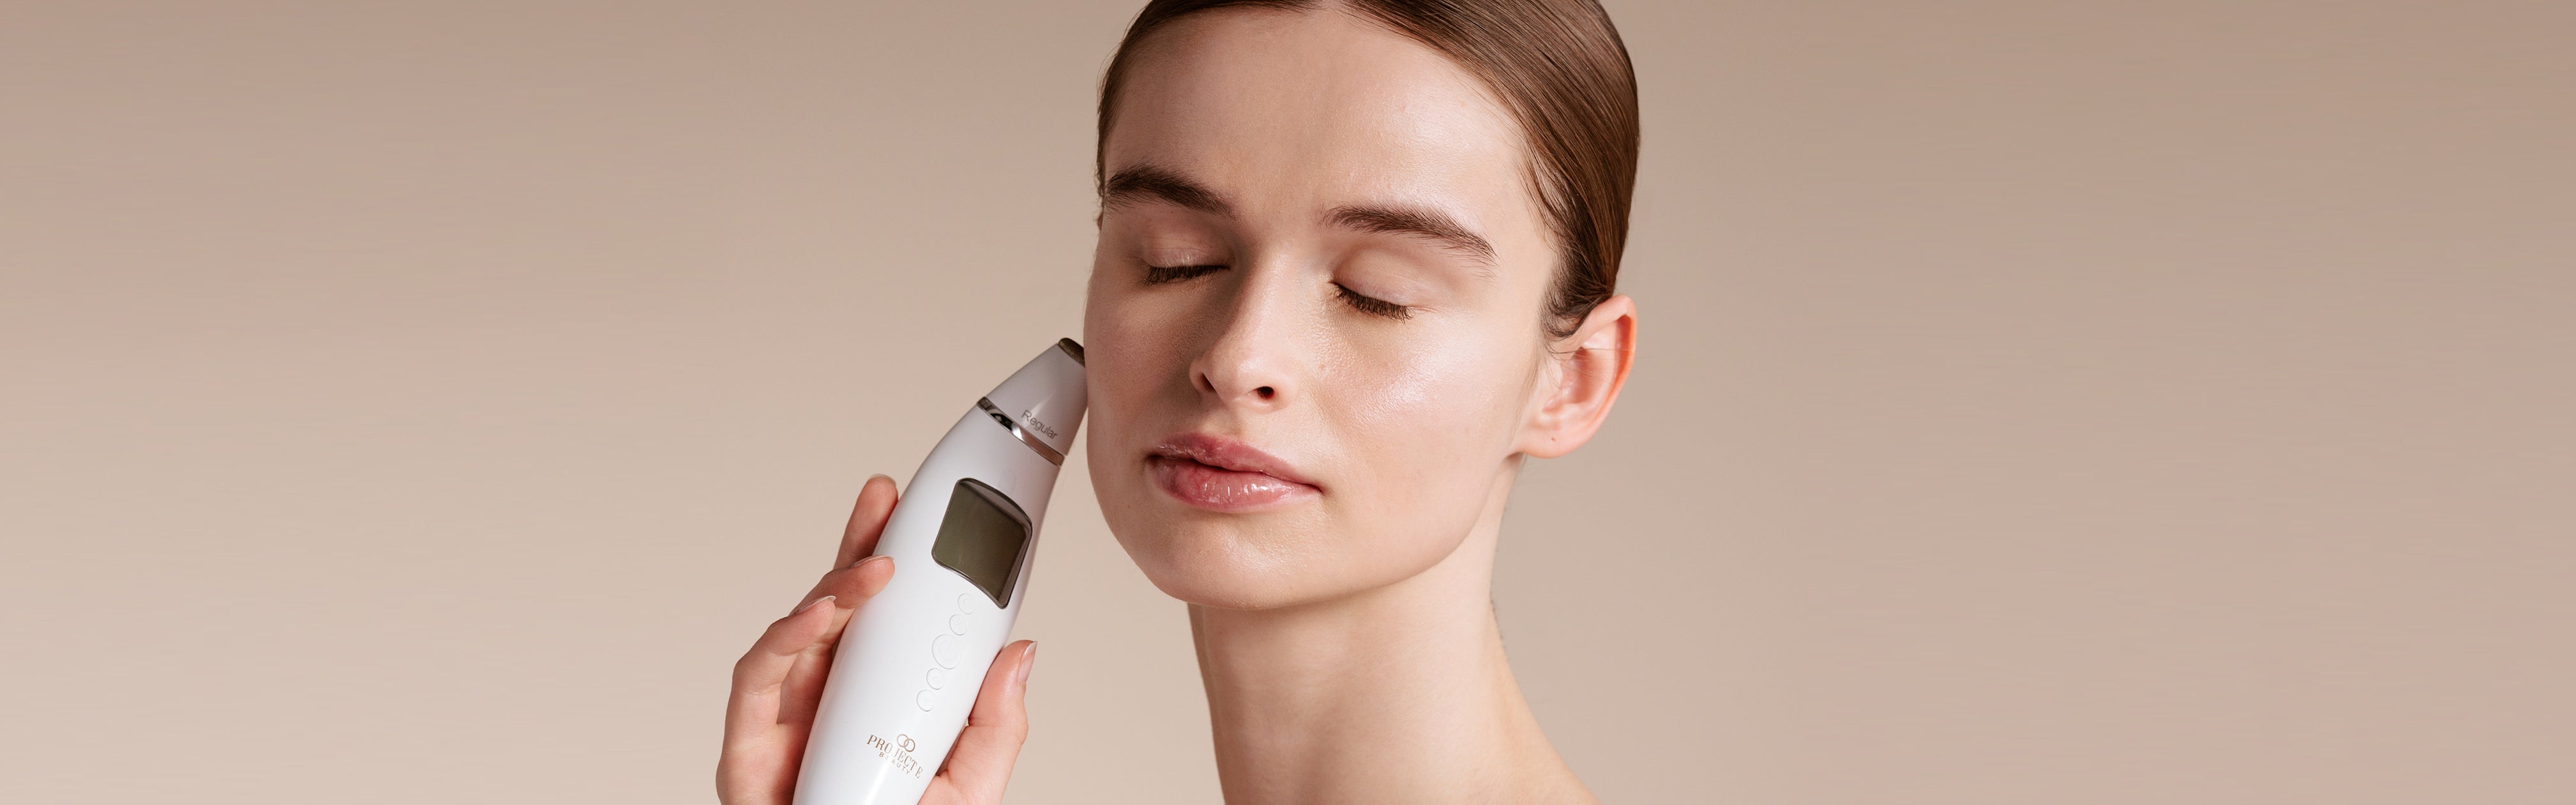 The Benefits of Microdermabrasion and How To Try It